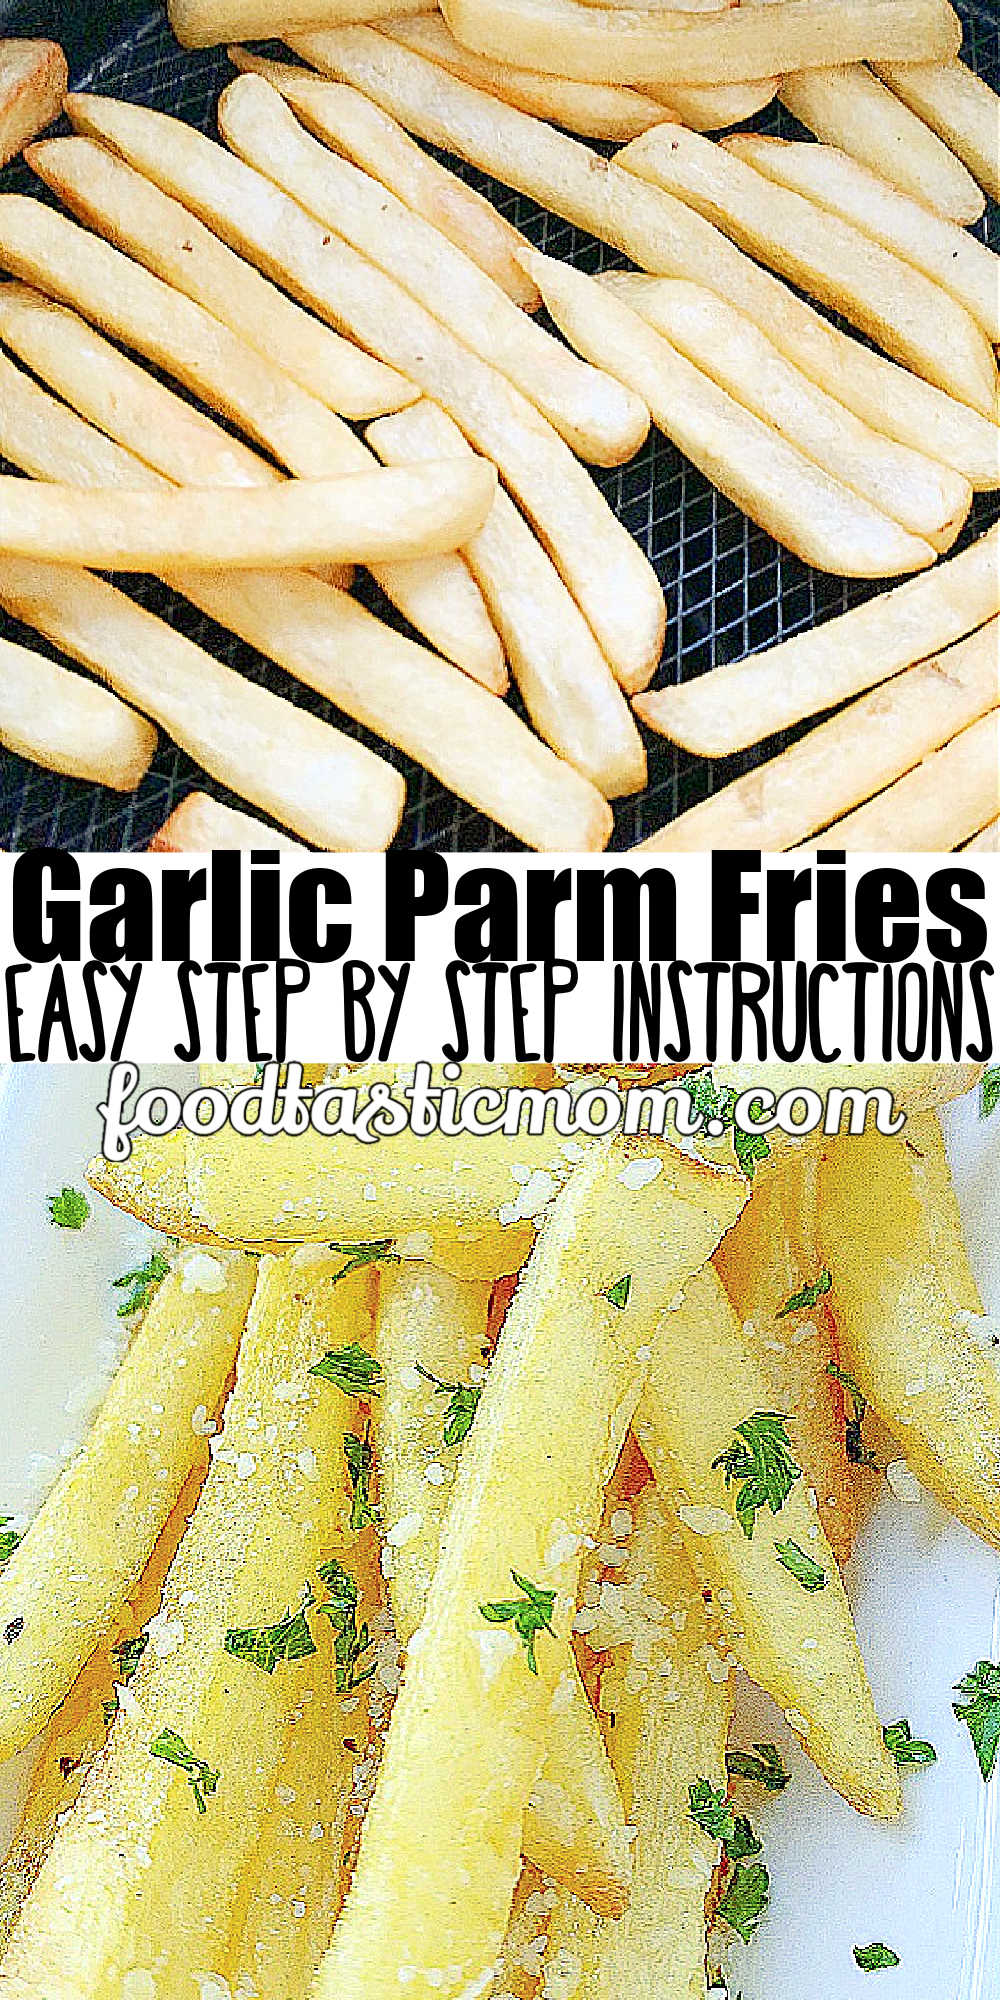 Learn how make Air Fryer Frozen French Fries and then make them extra delicious by turning them into Garlic Parmesan French Fries. via @foodtasticmom